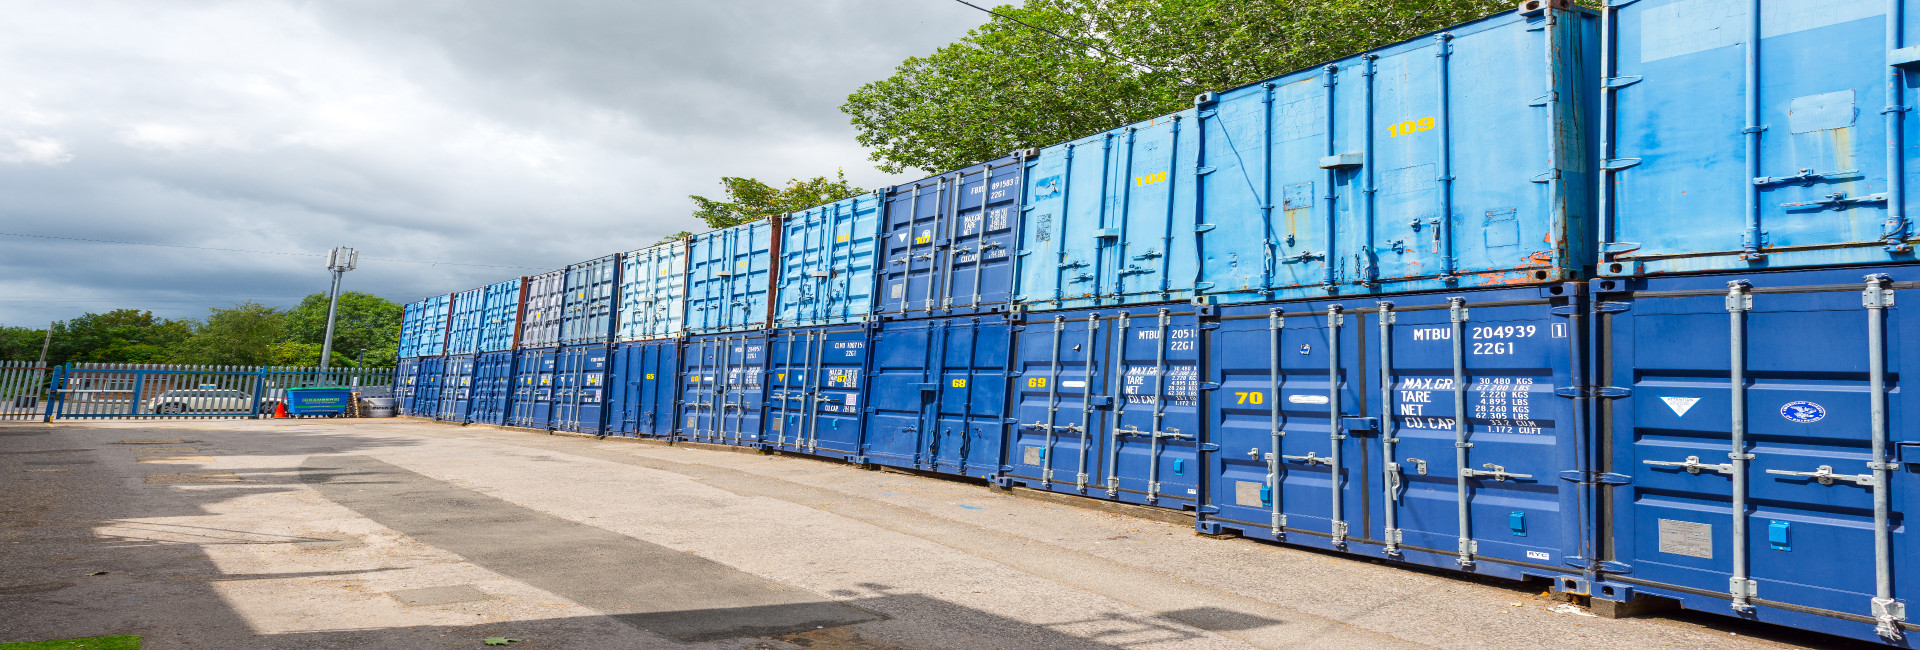 Self storage containers at our depot